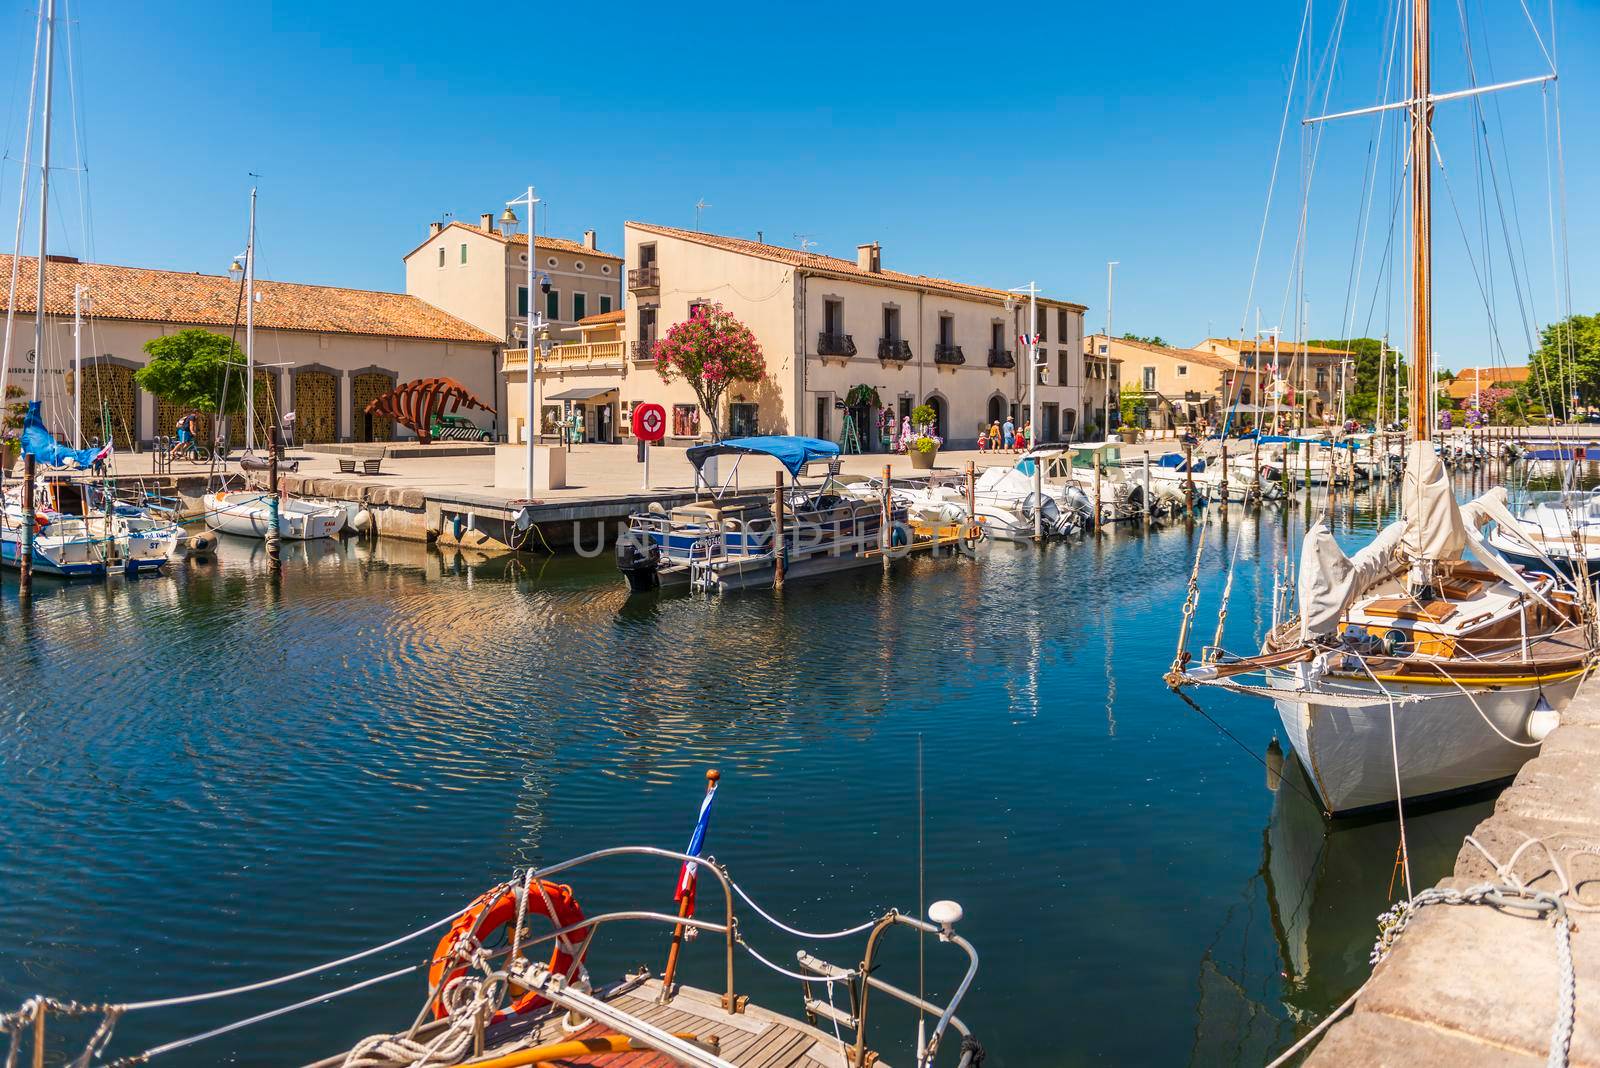 Marseillan is a French commune located in the Hérault department, in the Occitanie region. Since December 31, 2002, it has been part of the Sète Agglopôle Méditerranée agglomeration community